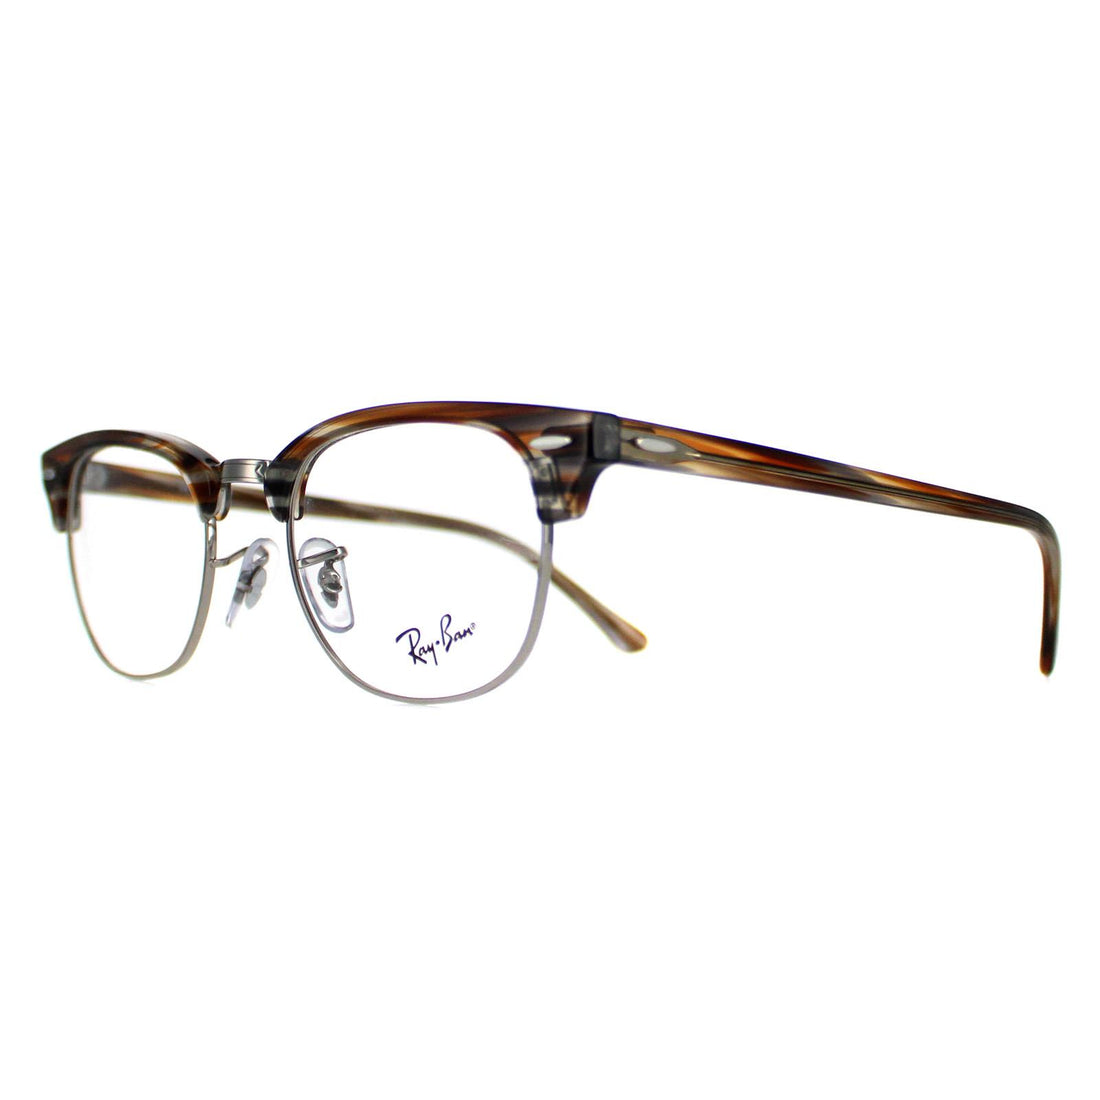 Ray-Ban Glasses Frames RX5154 Clubmaster 5749 Polished Brown Men Women